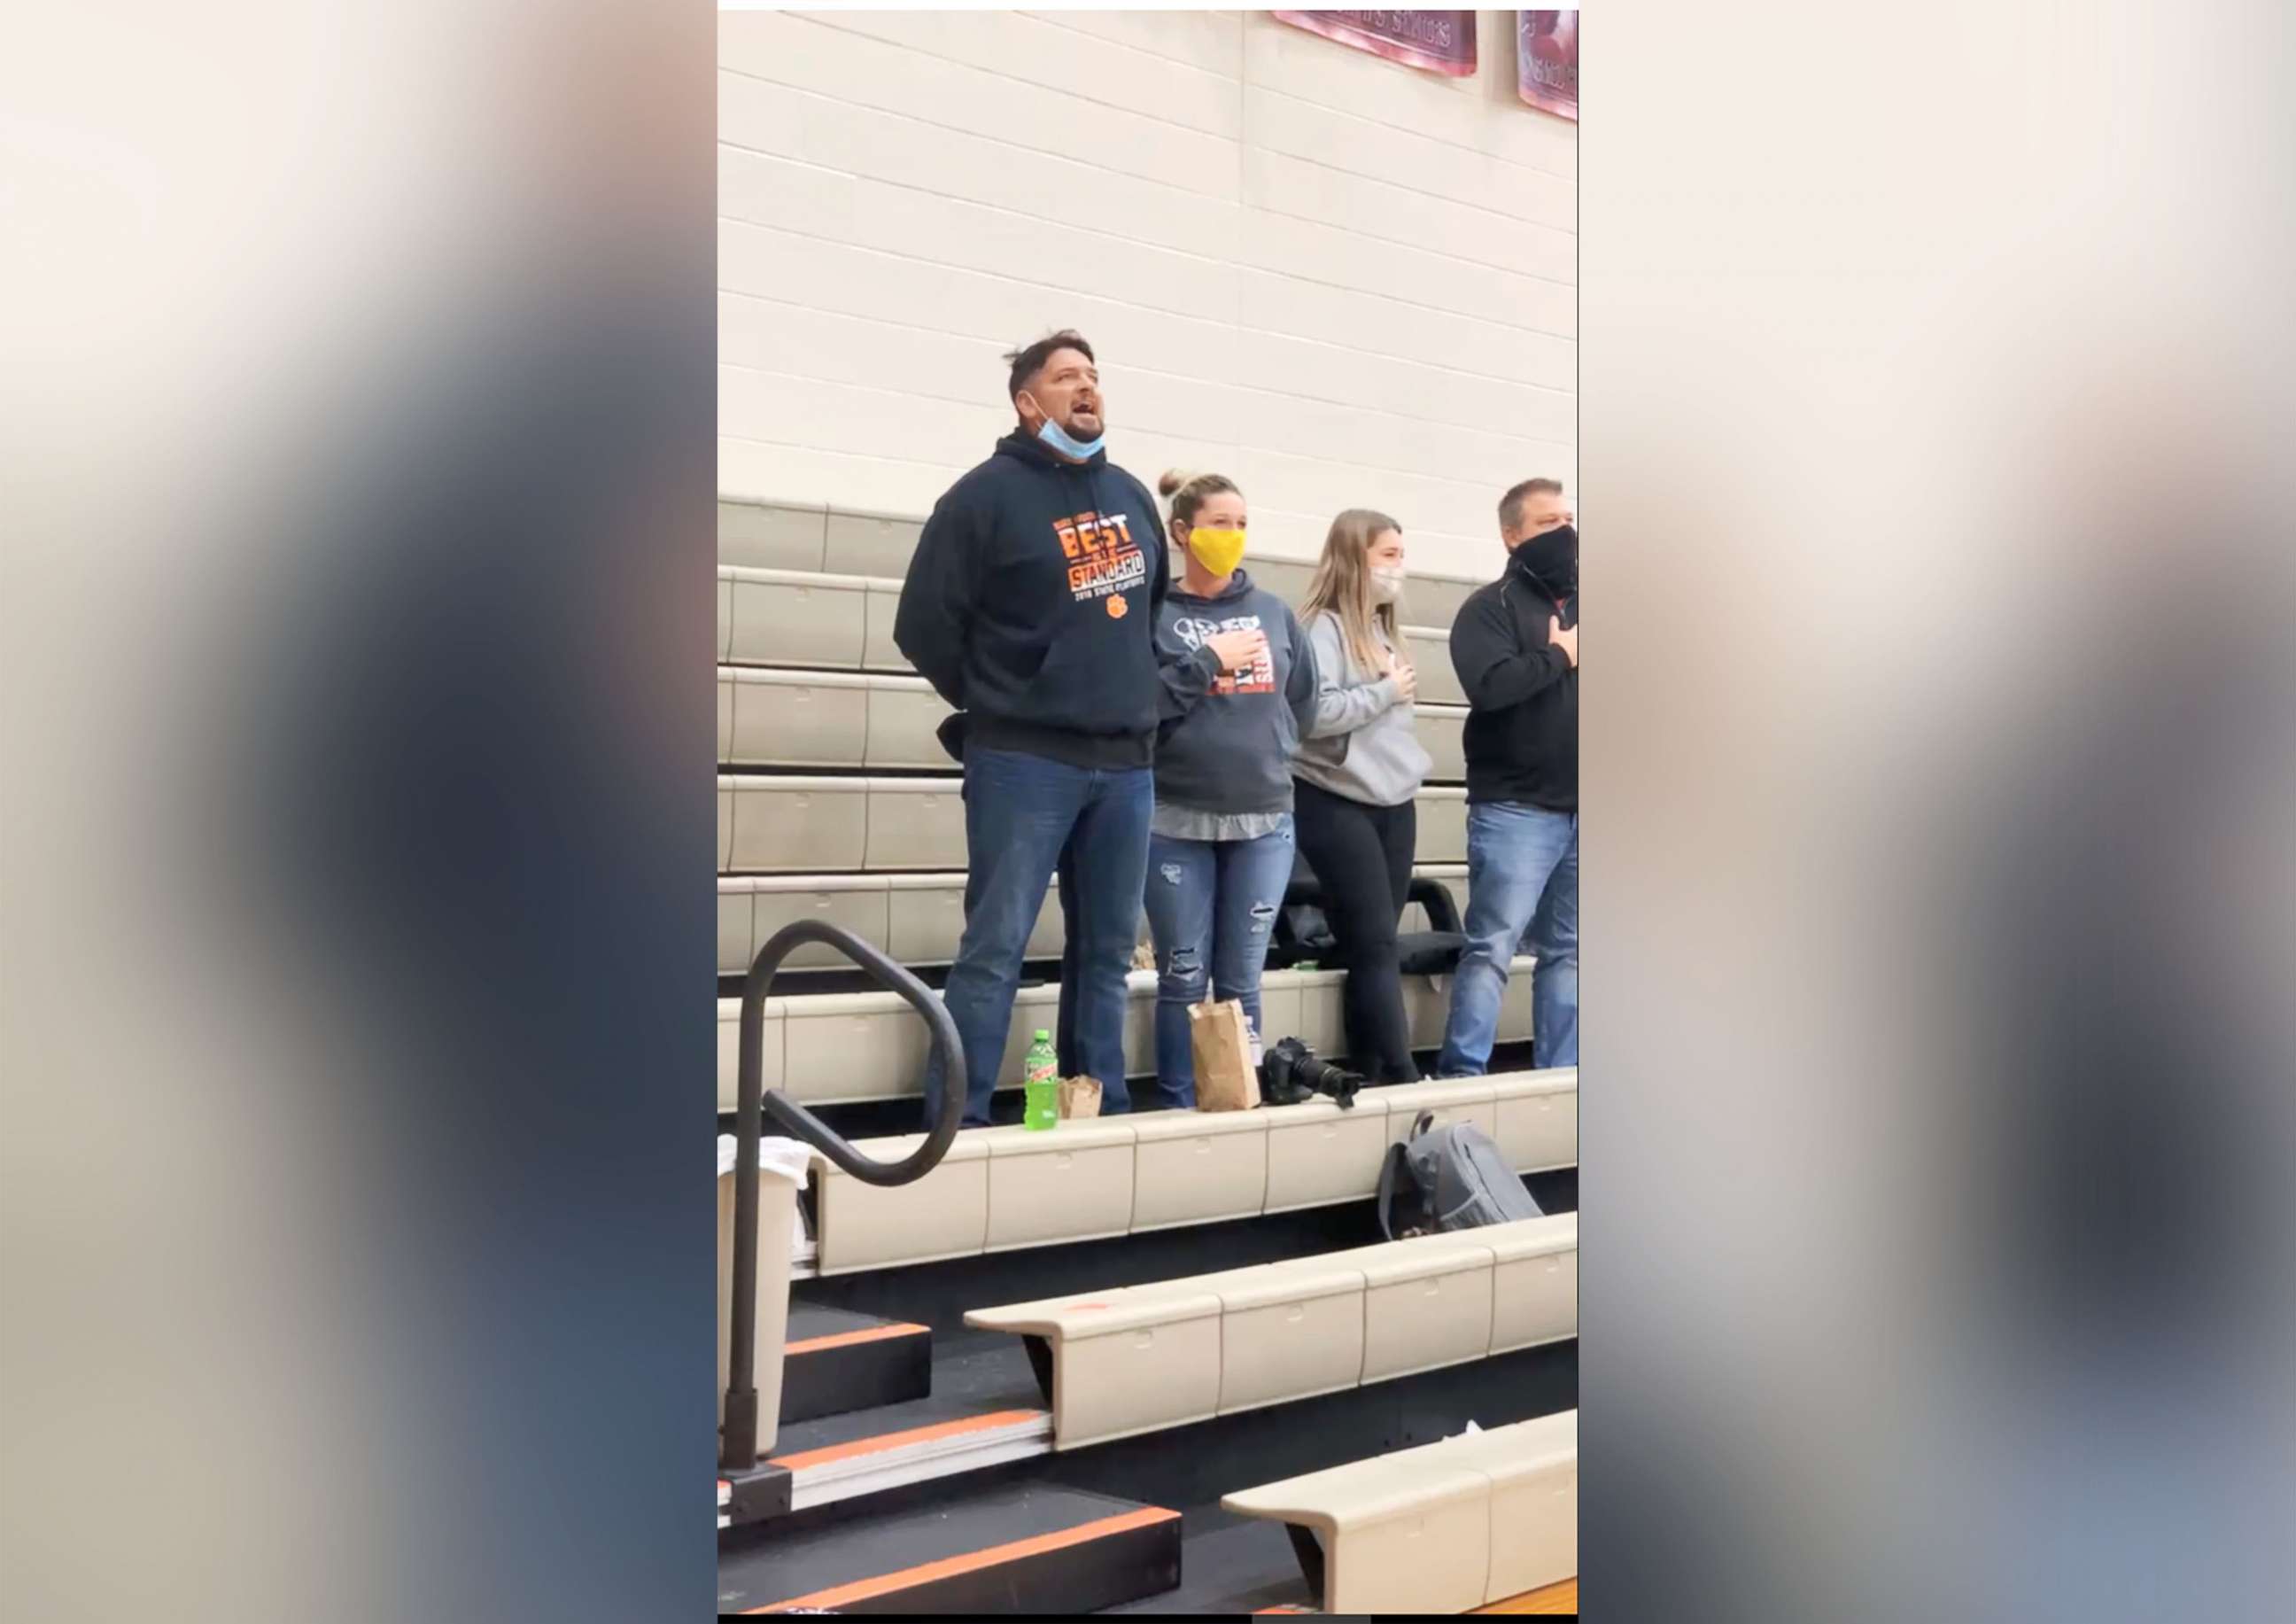 PHOTO: Trent Brown sang the national anthem in an impromptu performance at his son's high school basketball game in Waverly, Ohio.